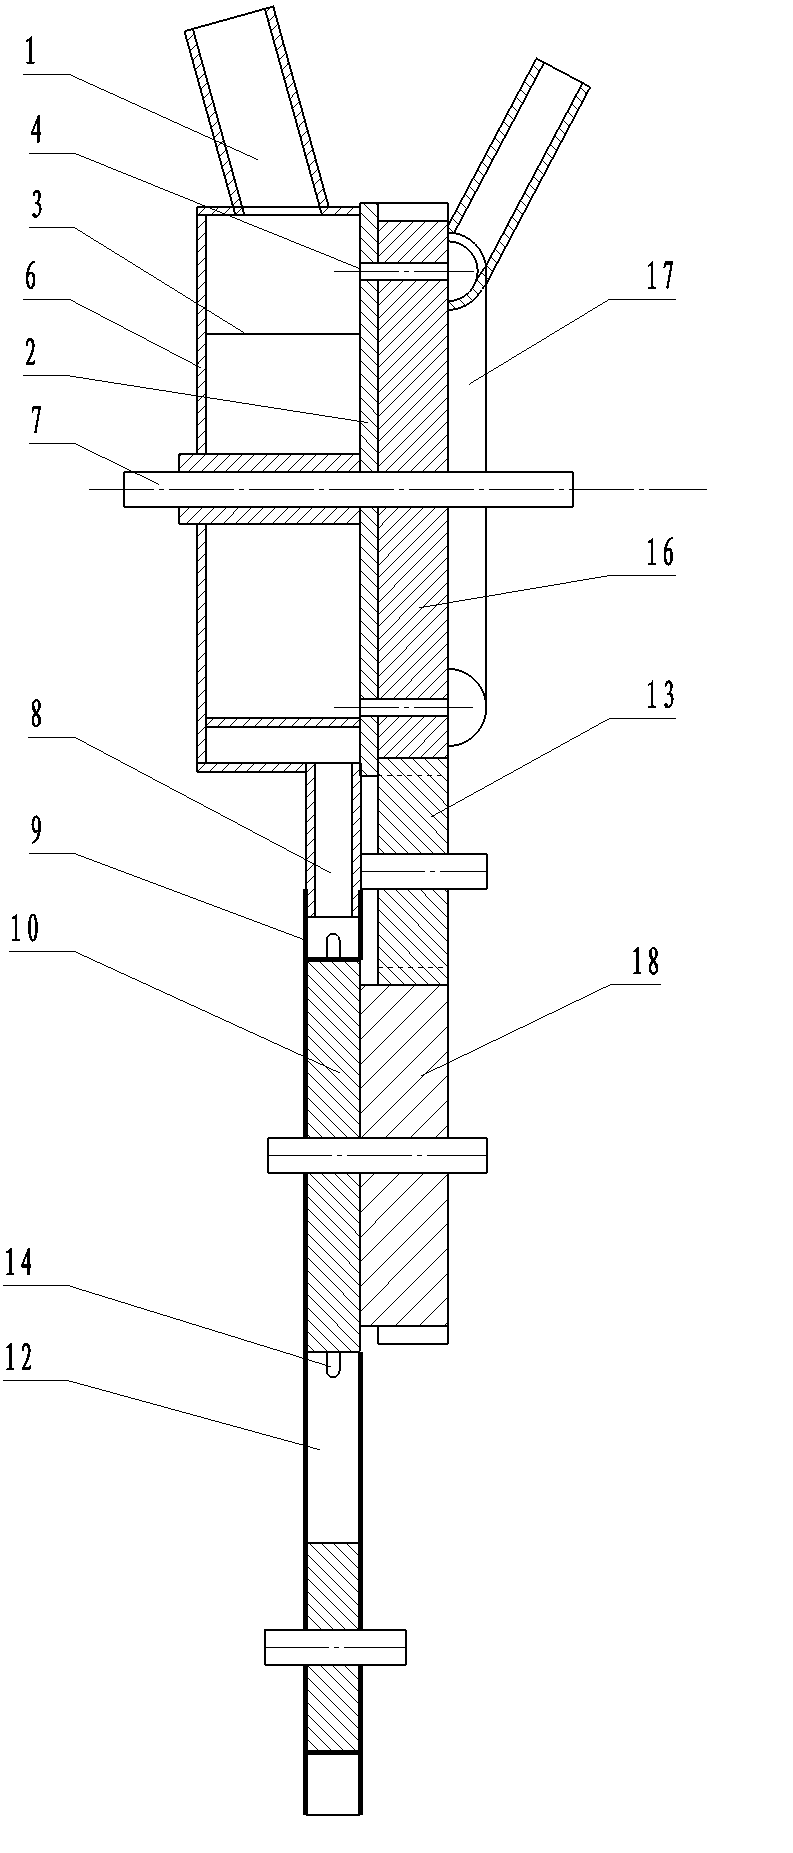 Seed metering and distributing device for precision drill